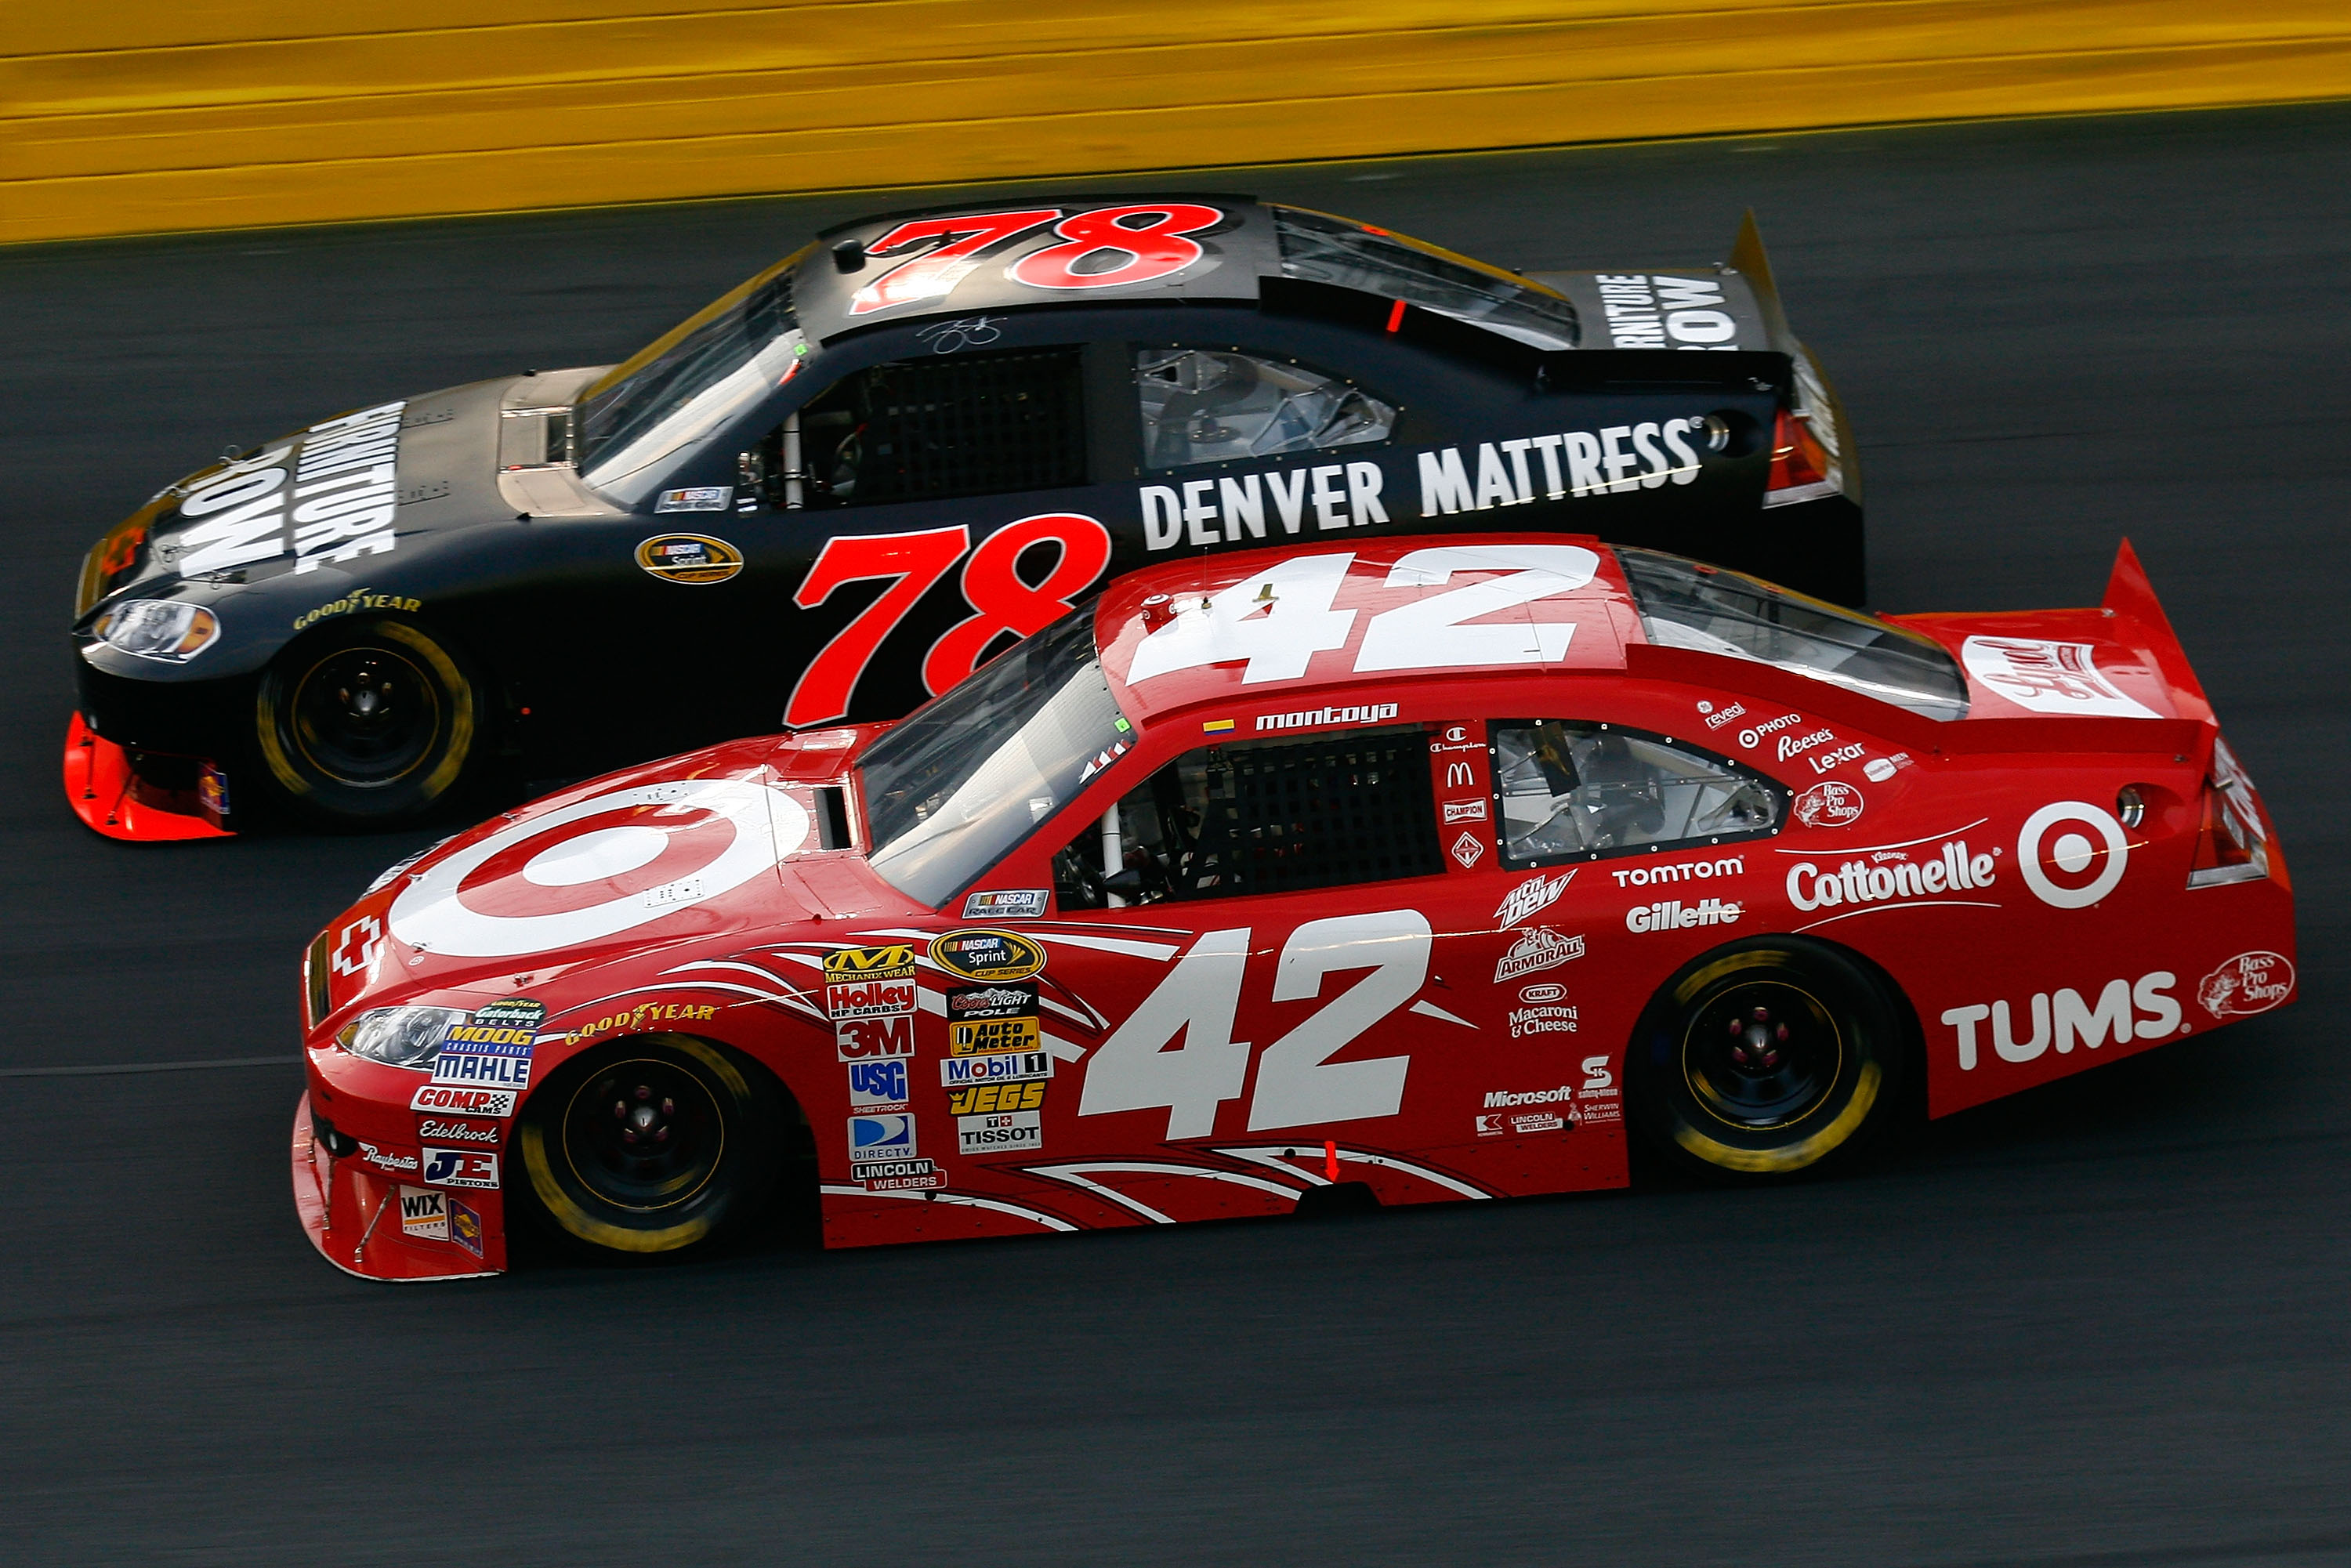 CONCORD, NC - MAY 22:  Juan Pablo Montoya, driver of the #42 Target Chevrolet, and Regan Smith, driver of the #78 Furniture Row Racing Chevrolet, race side by side during the NASCAR Sprint Showdown at Charlotte Motor Speedway on May 22, 2010 in Concord, N